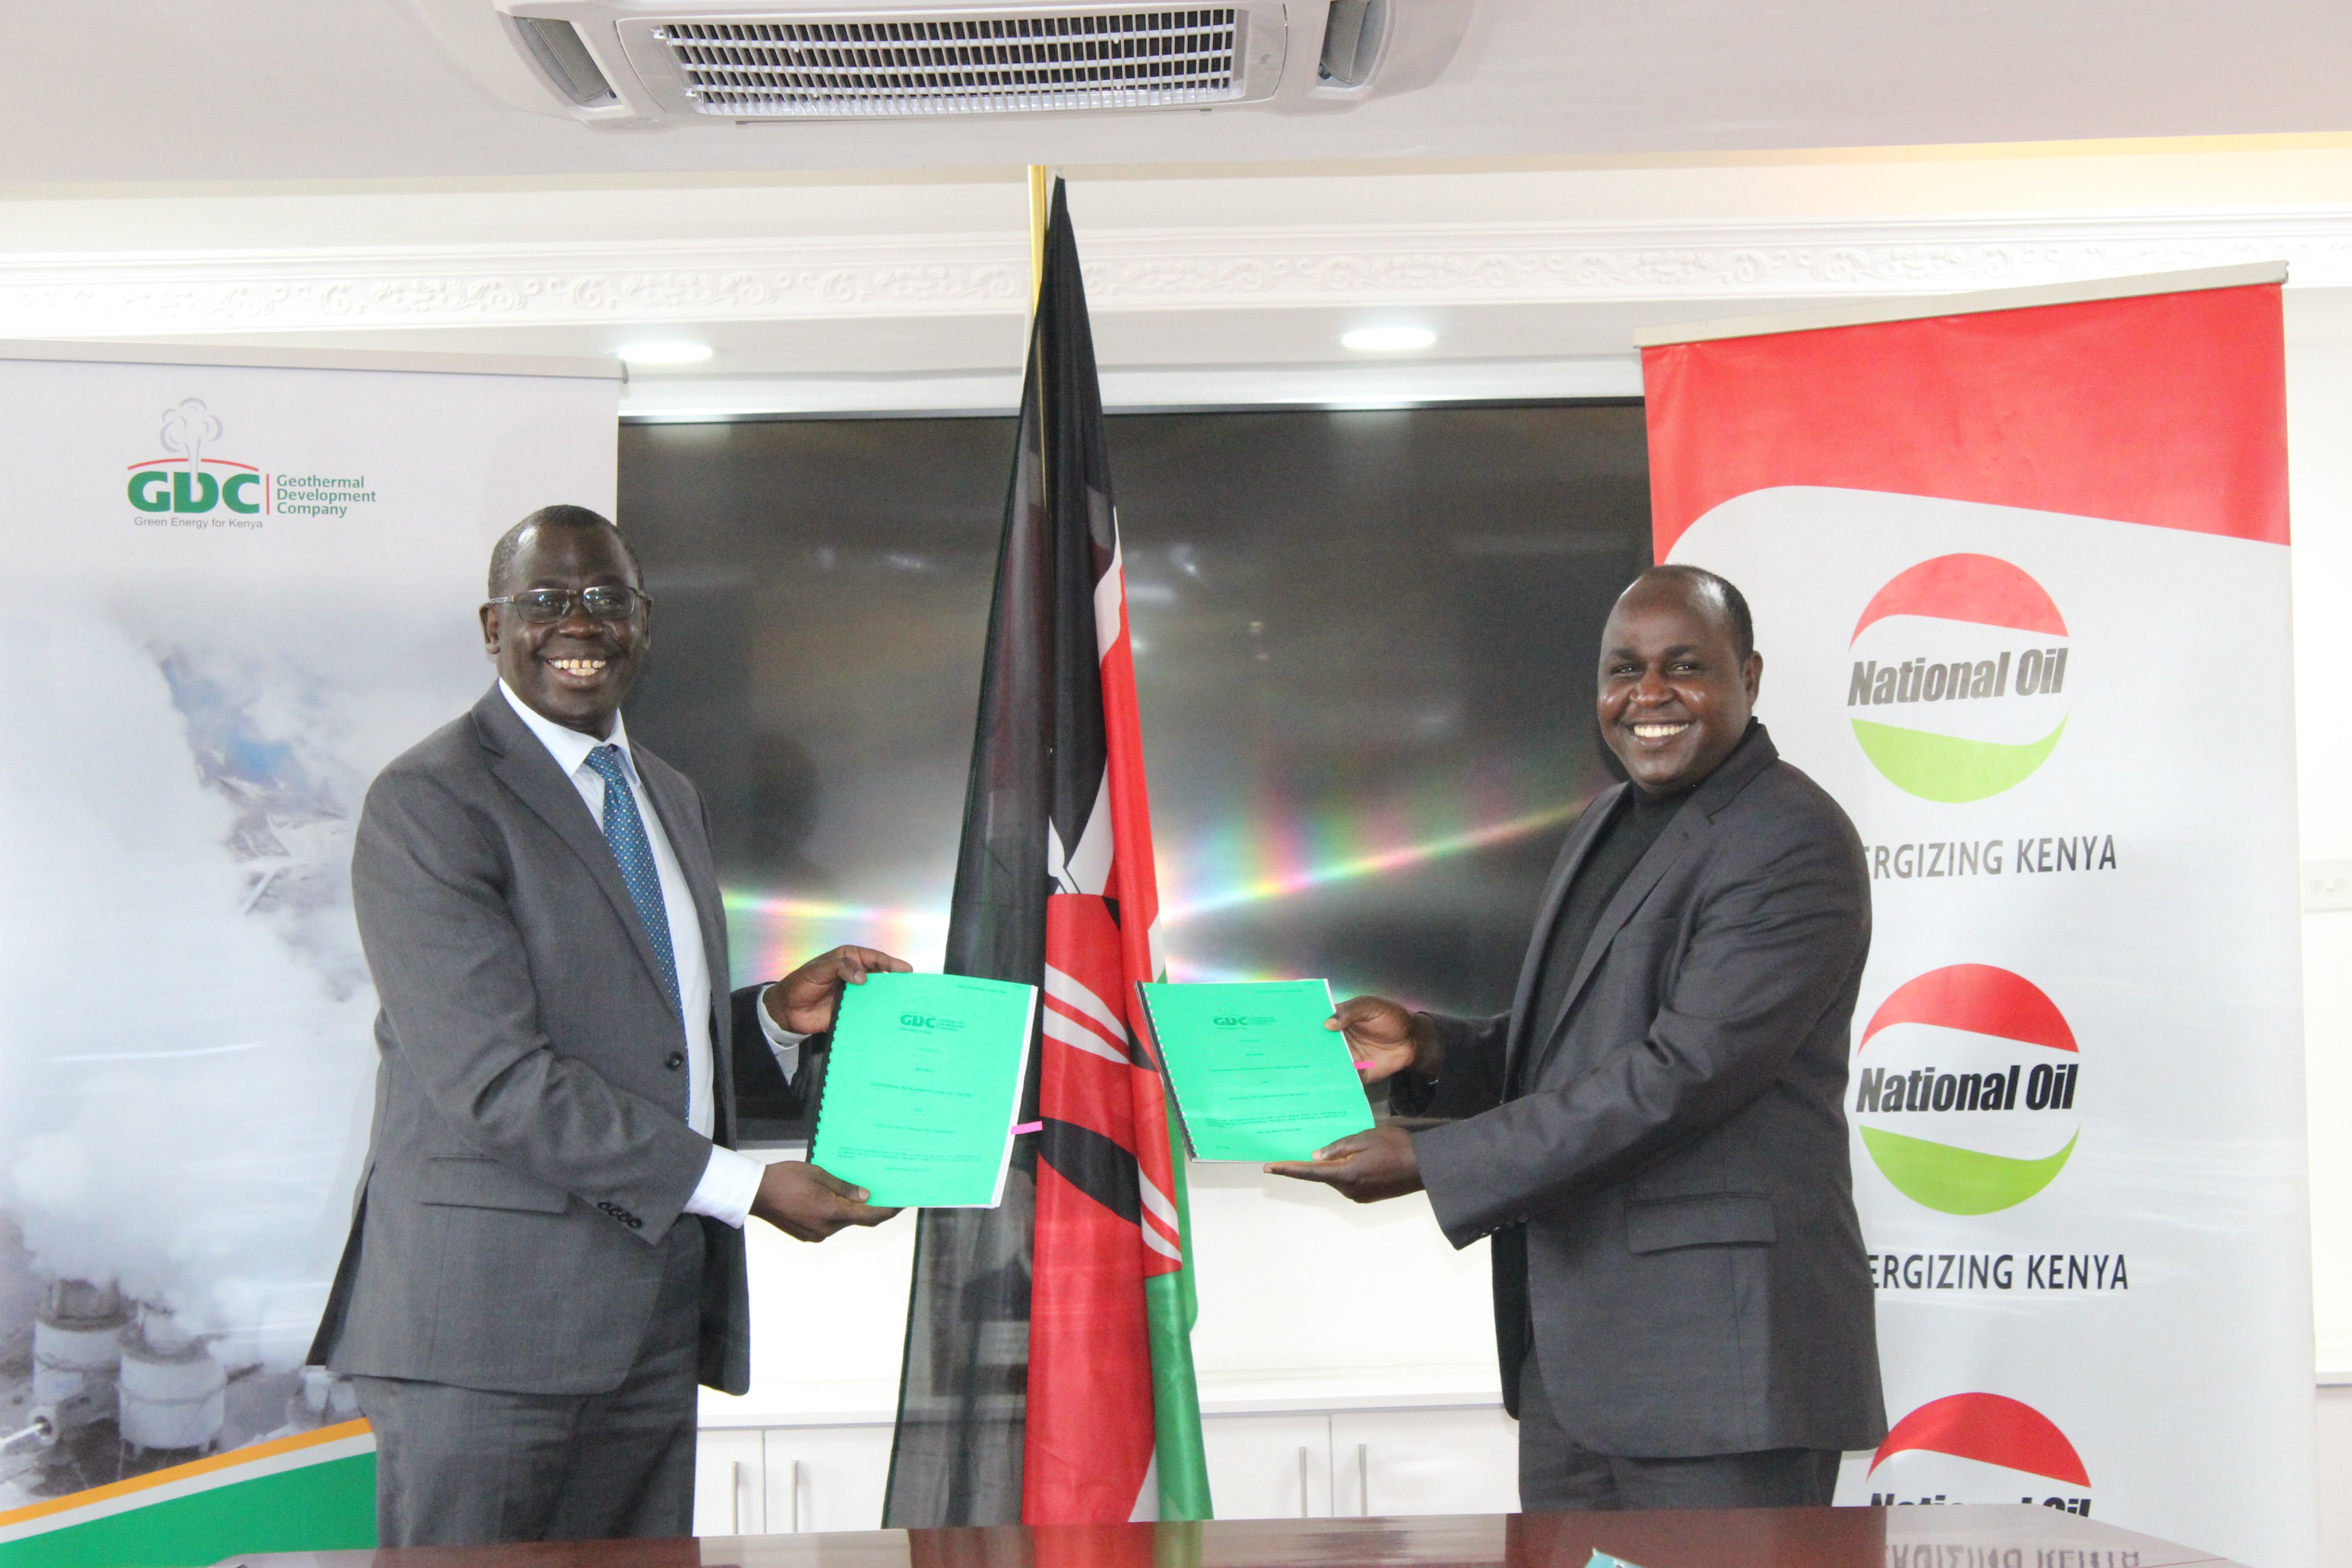 National Oil inks deal to supply over 10 million litres of fuel to GDC